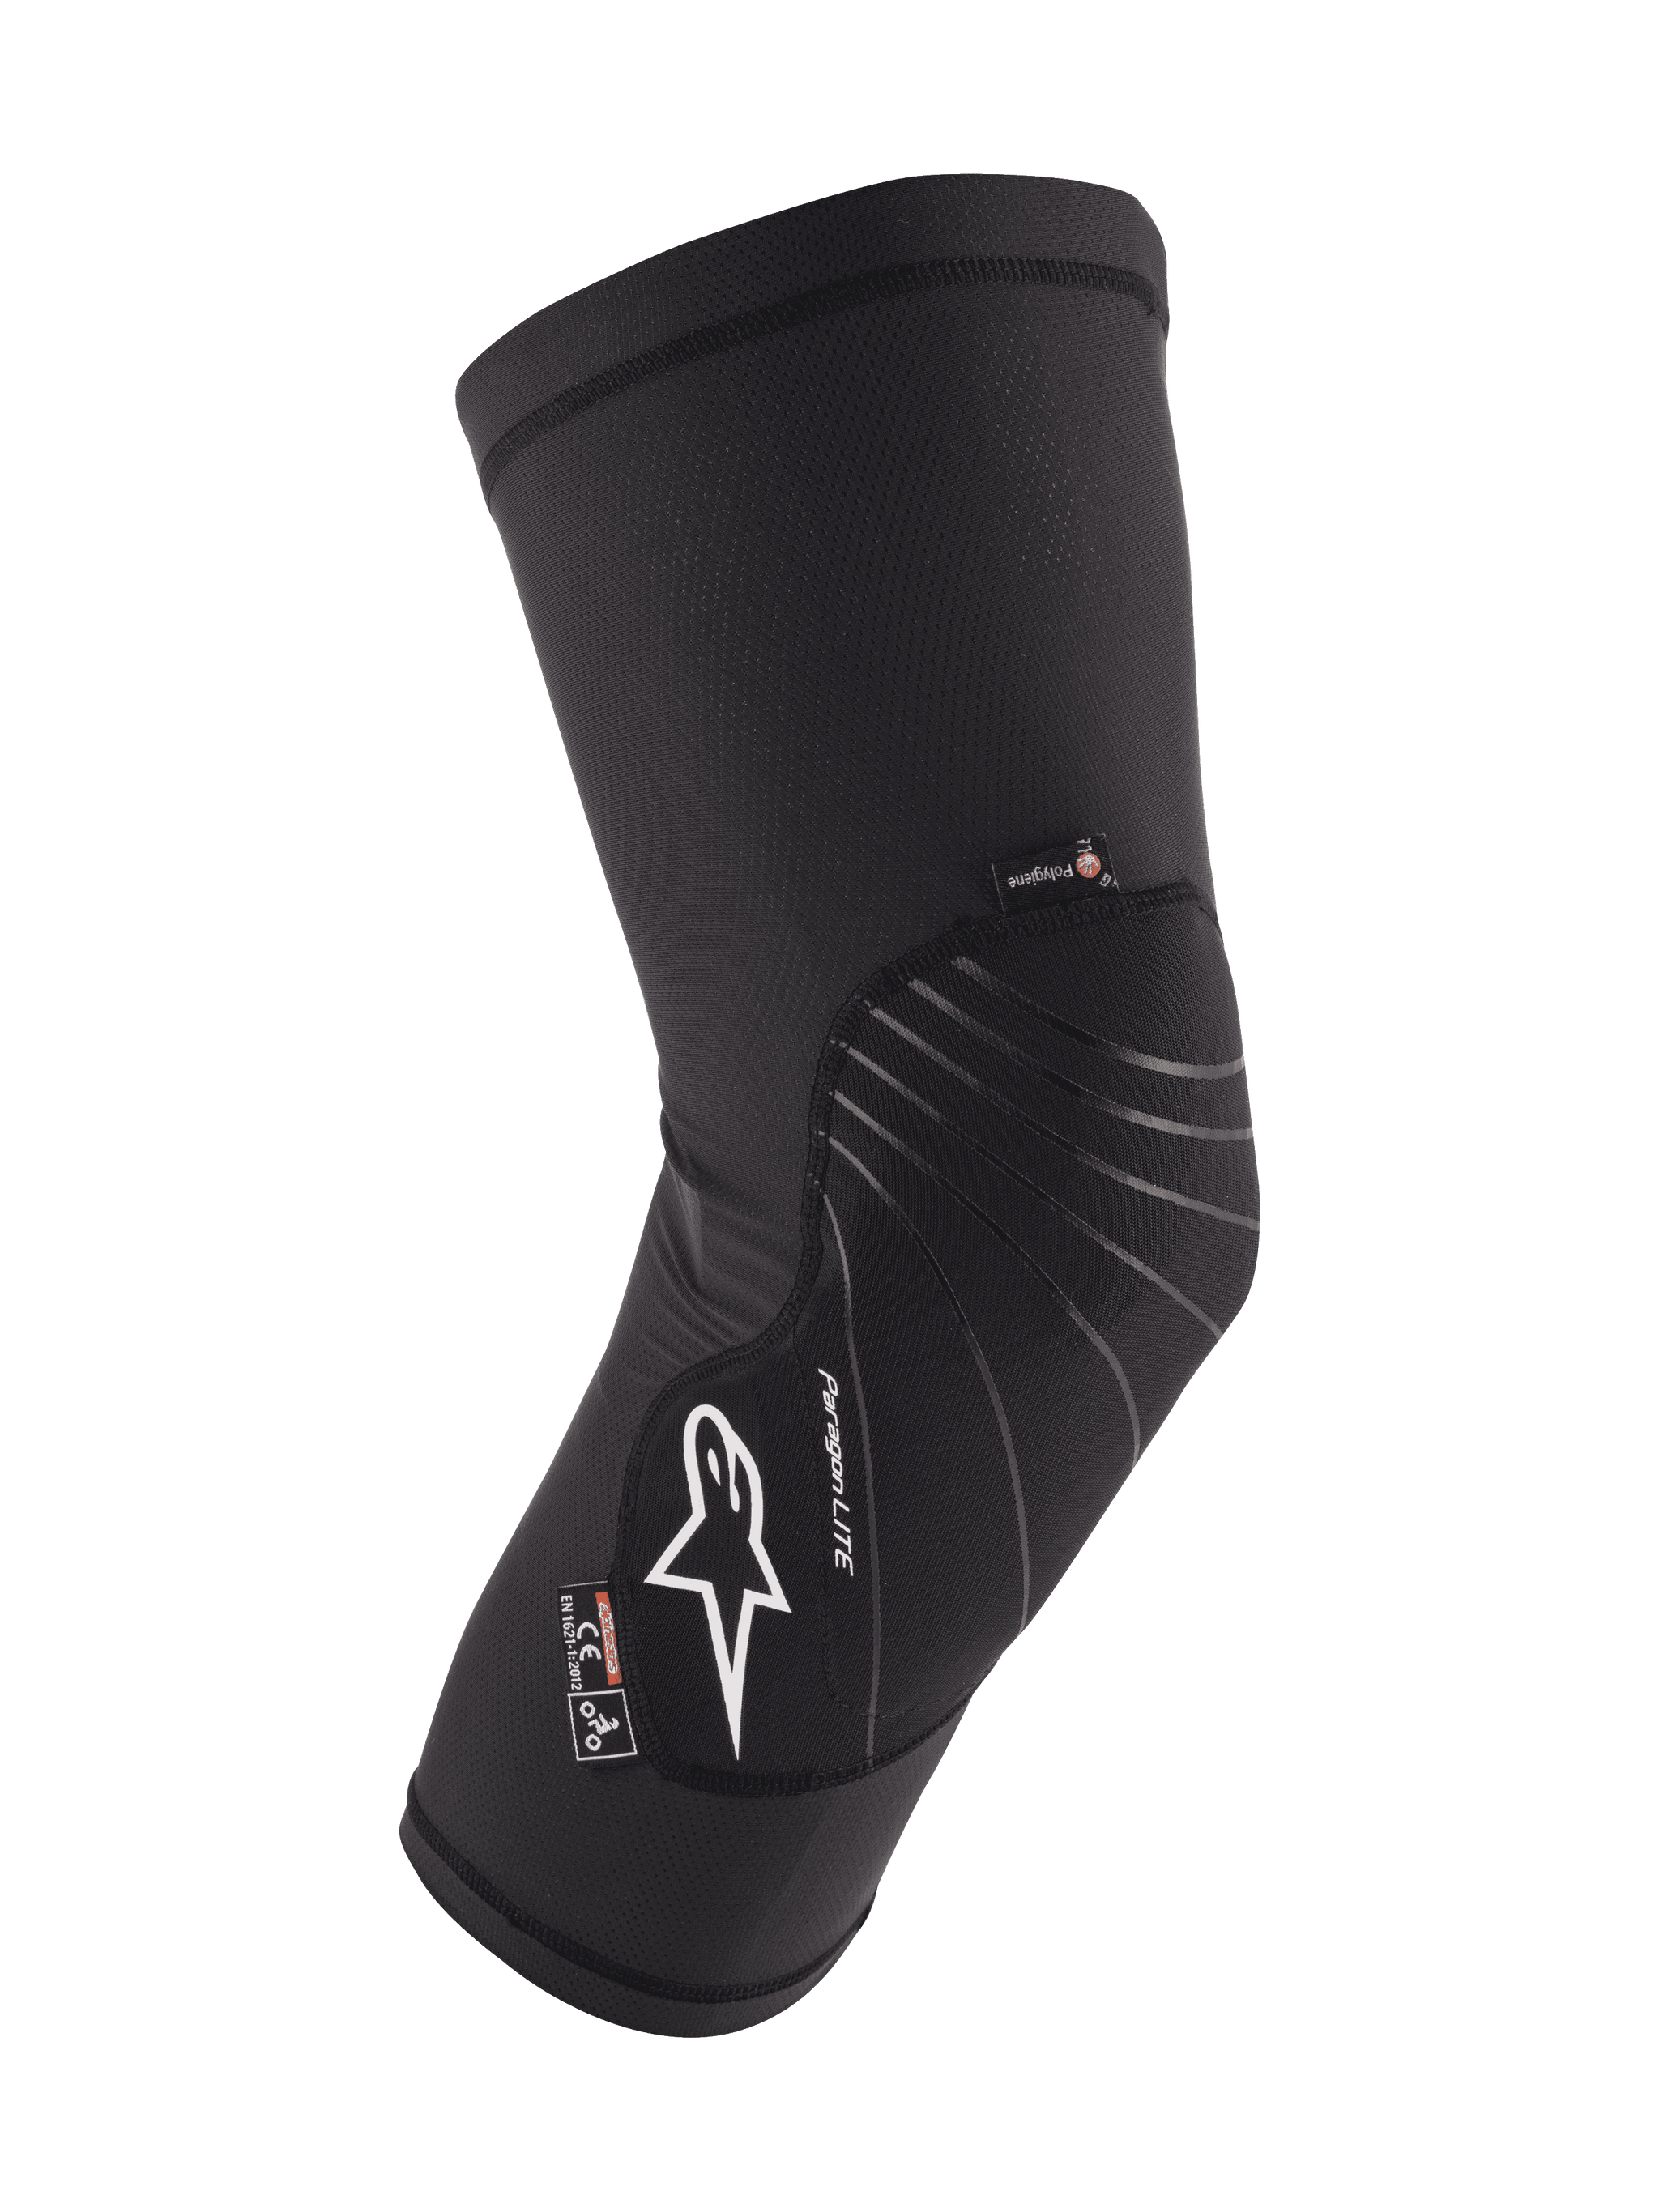 Youth Paragon Lite Knee Protector